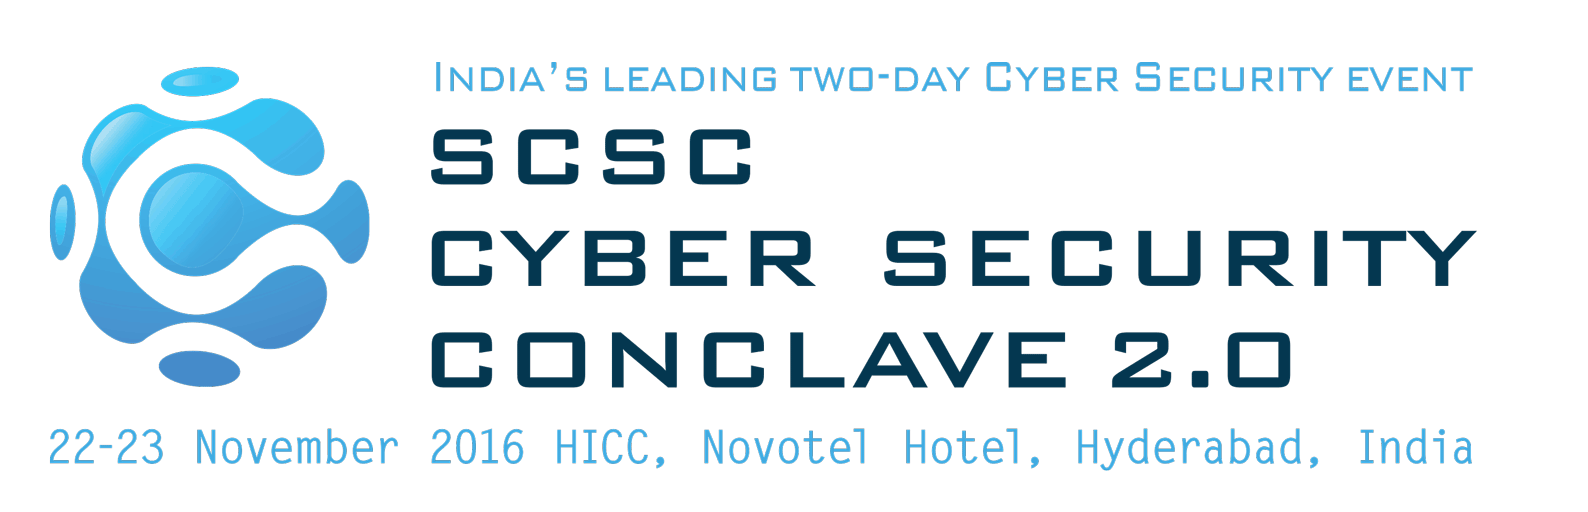 scsc_cyber_security_logo